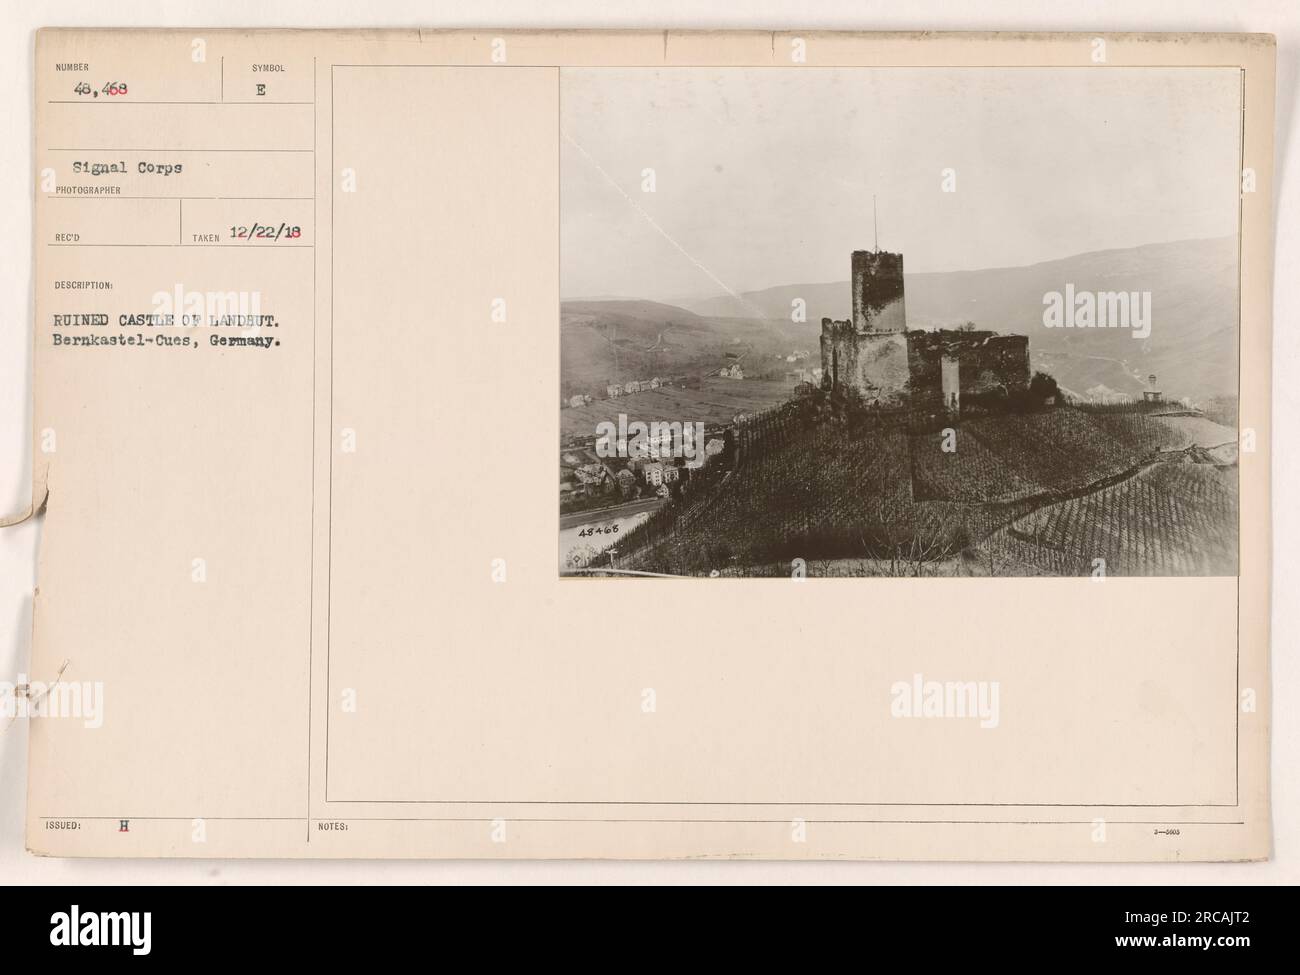 Ruined castle of Landhut in Bernkastel-Cues, Germany. The photograph was taken by the Signal Corps and received the description symbol E 18SUED. It was taken on December 22, 1918 and the castle is in a state of ruin. There are approximately 3-400 notes associated with this image. Stock Photo